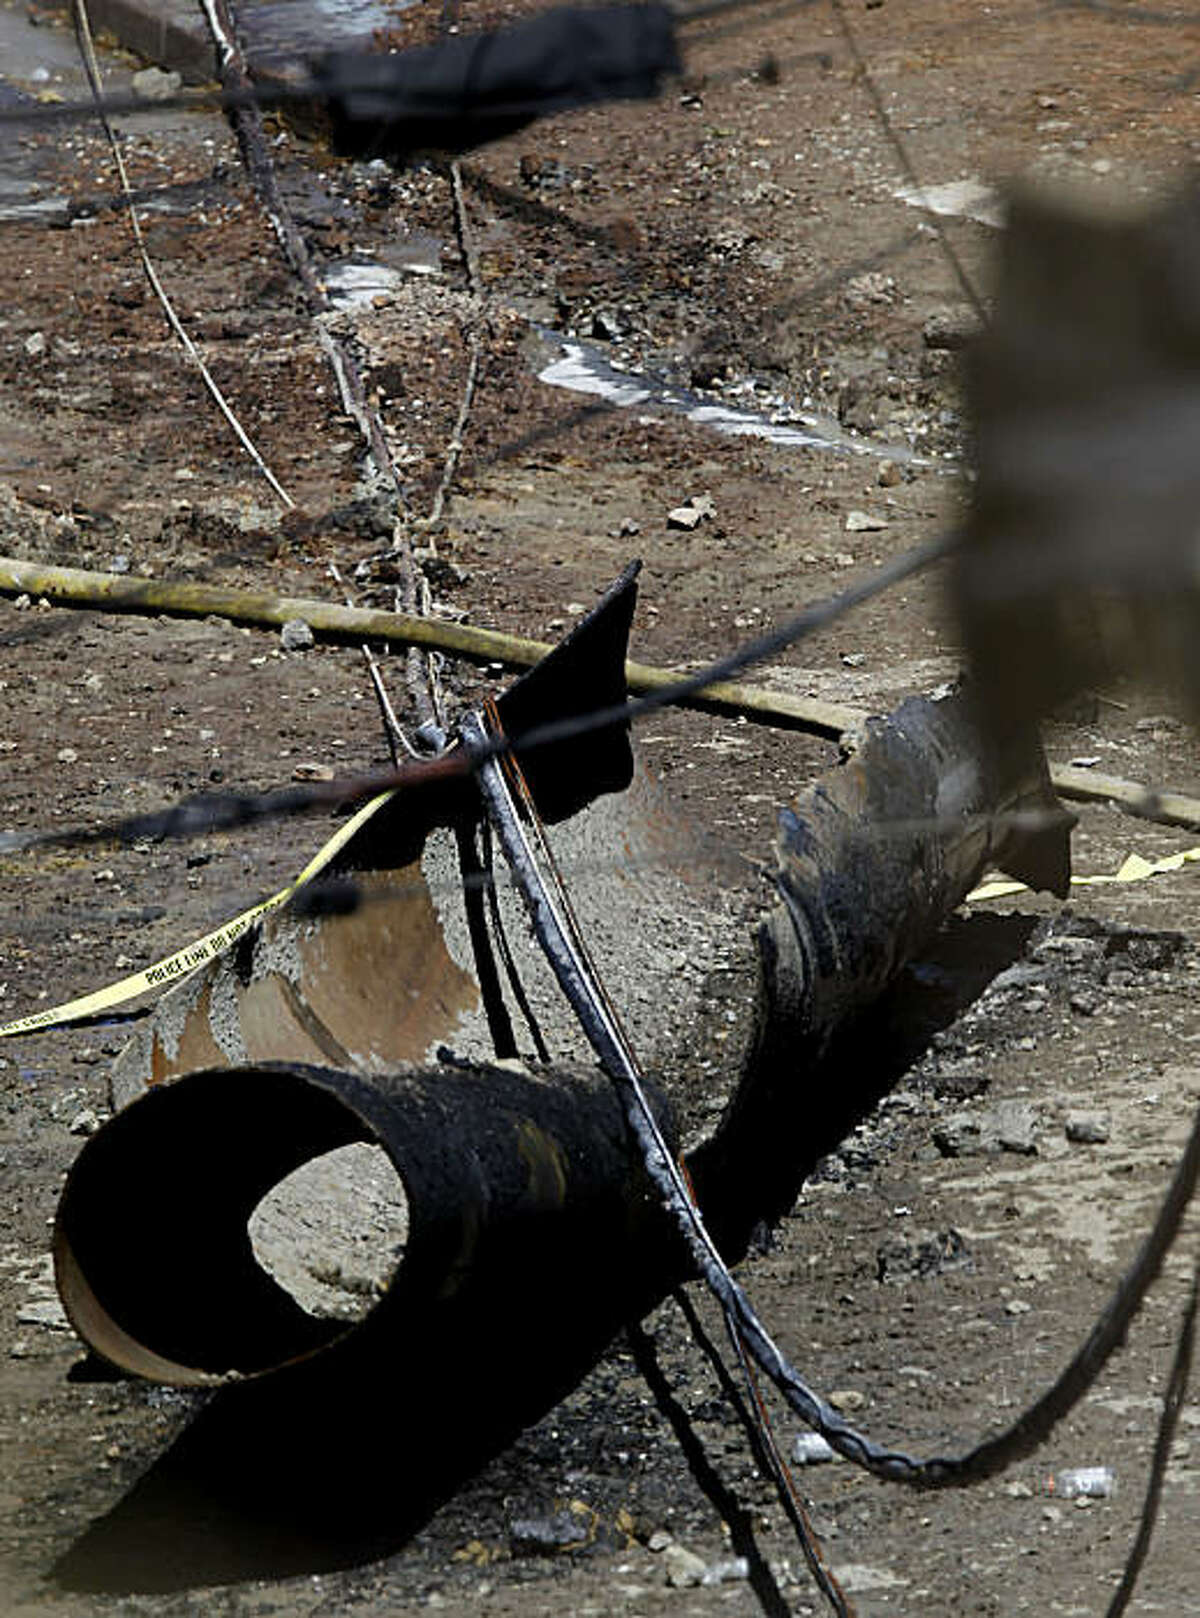 A piece of the large high pressure natural gas line, lies in the middle of the street covered with police tape, near the blast site on Friday Sept. 10, 2010, in which an explosion and fire leveled the surrounding neighborhood the night before in San Bruno, Calif.